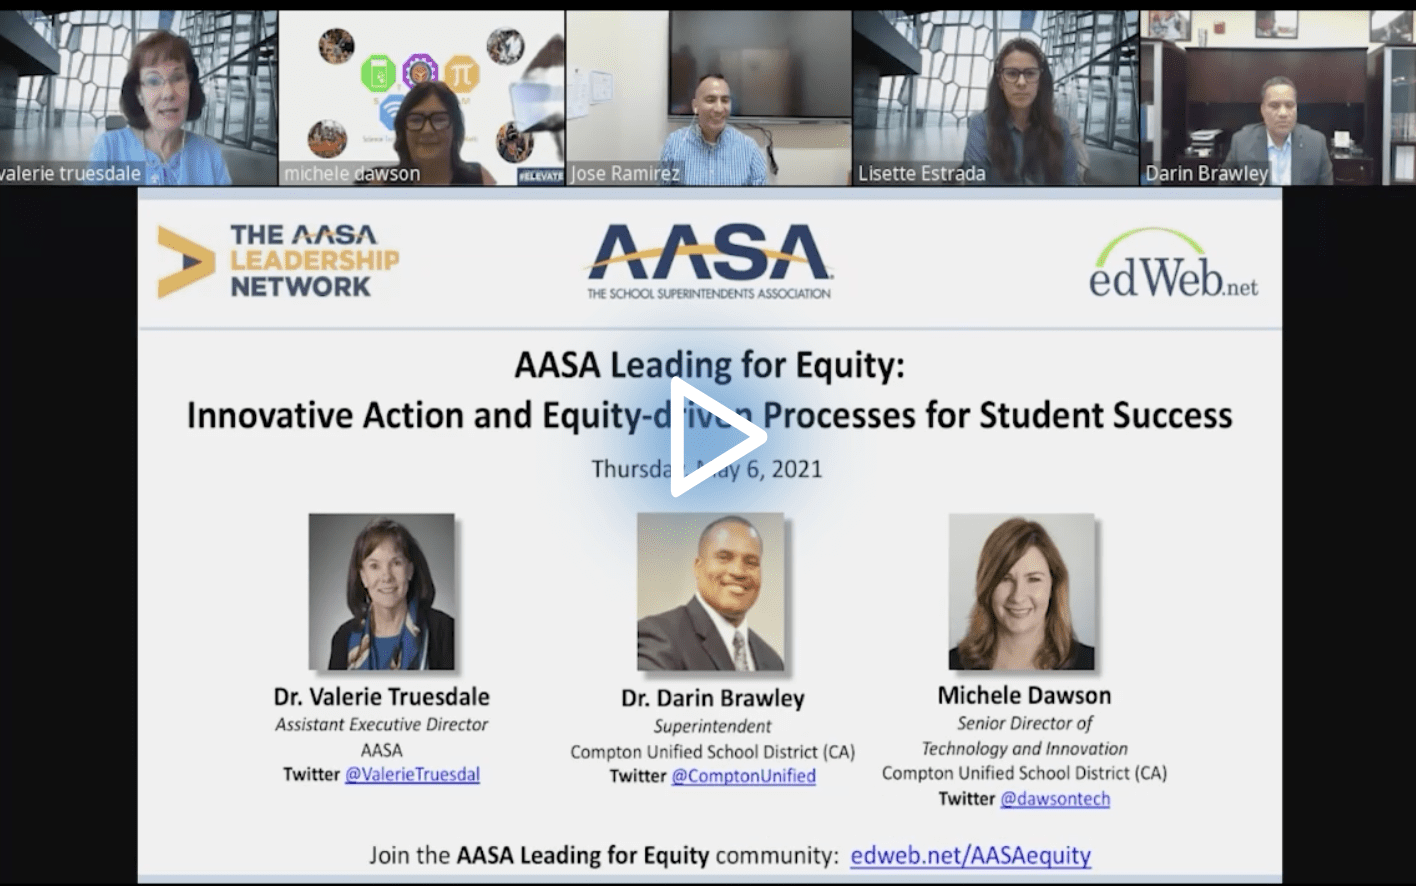 AASA Leading for Equity: Innovative Action and Equity-Driven Processes for Student Success edWebinar recording link